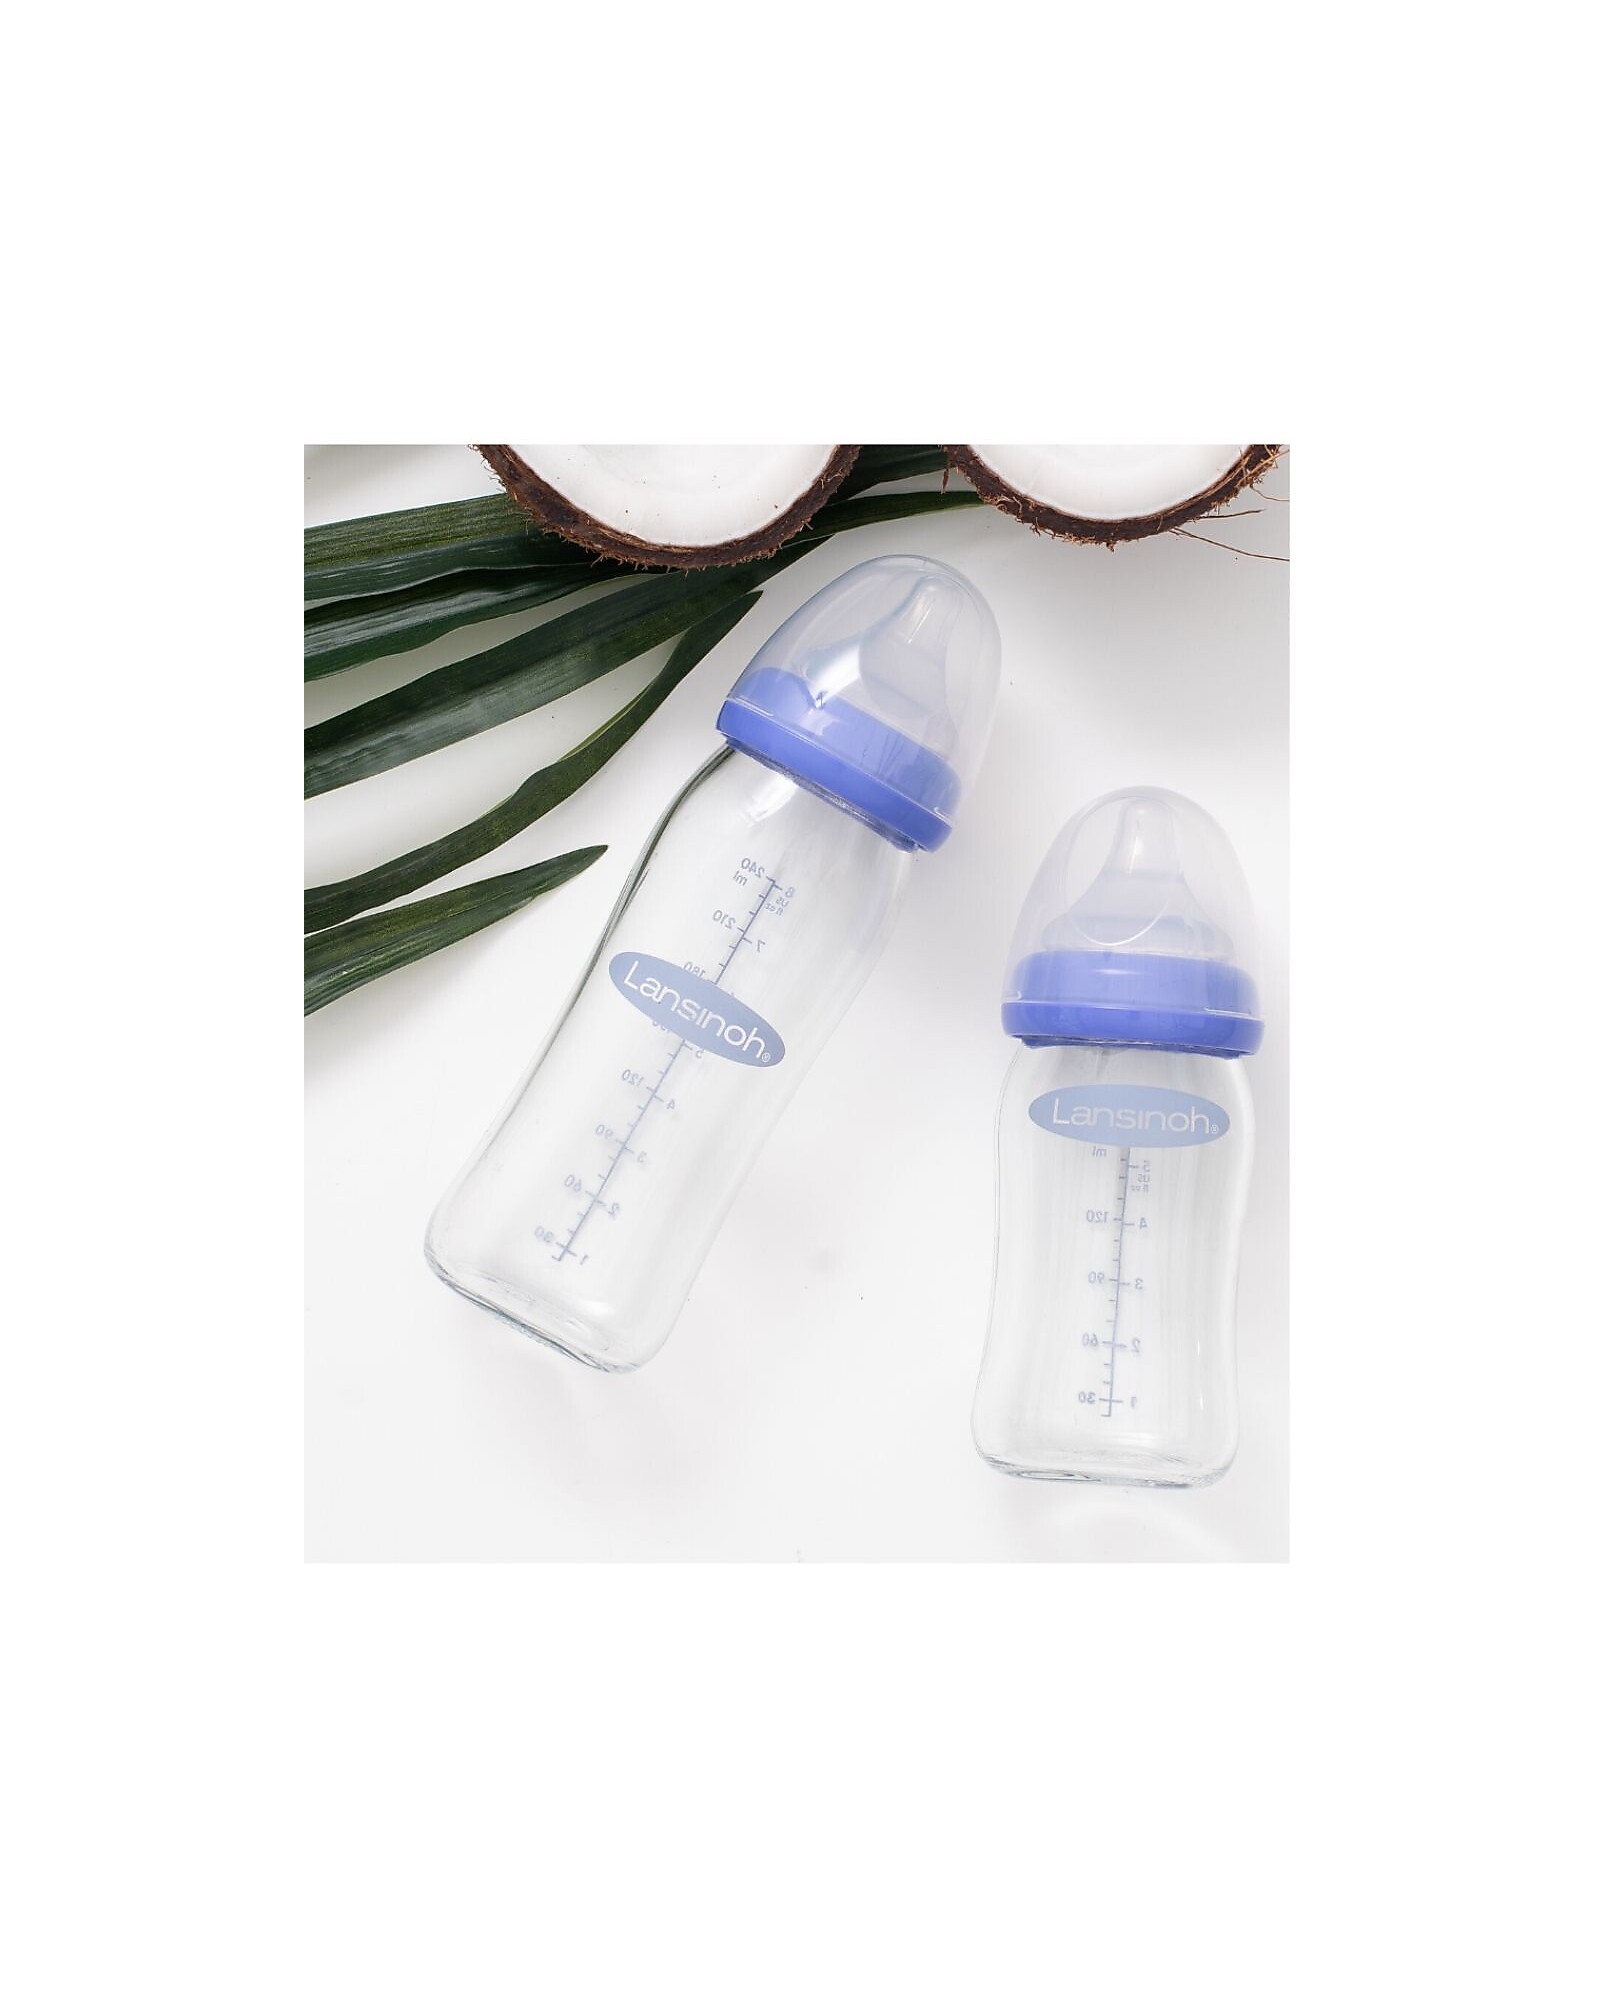 https://data.family-nation.com/imgprodotto/lansinoh-glass-baby-bottle-natural-wave-teat-160-ml-from-birth-bpa-and-bps-free-baby-bottles_478772_zoom.jpg